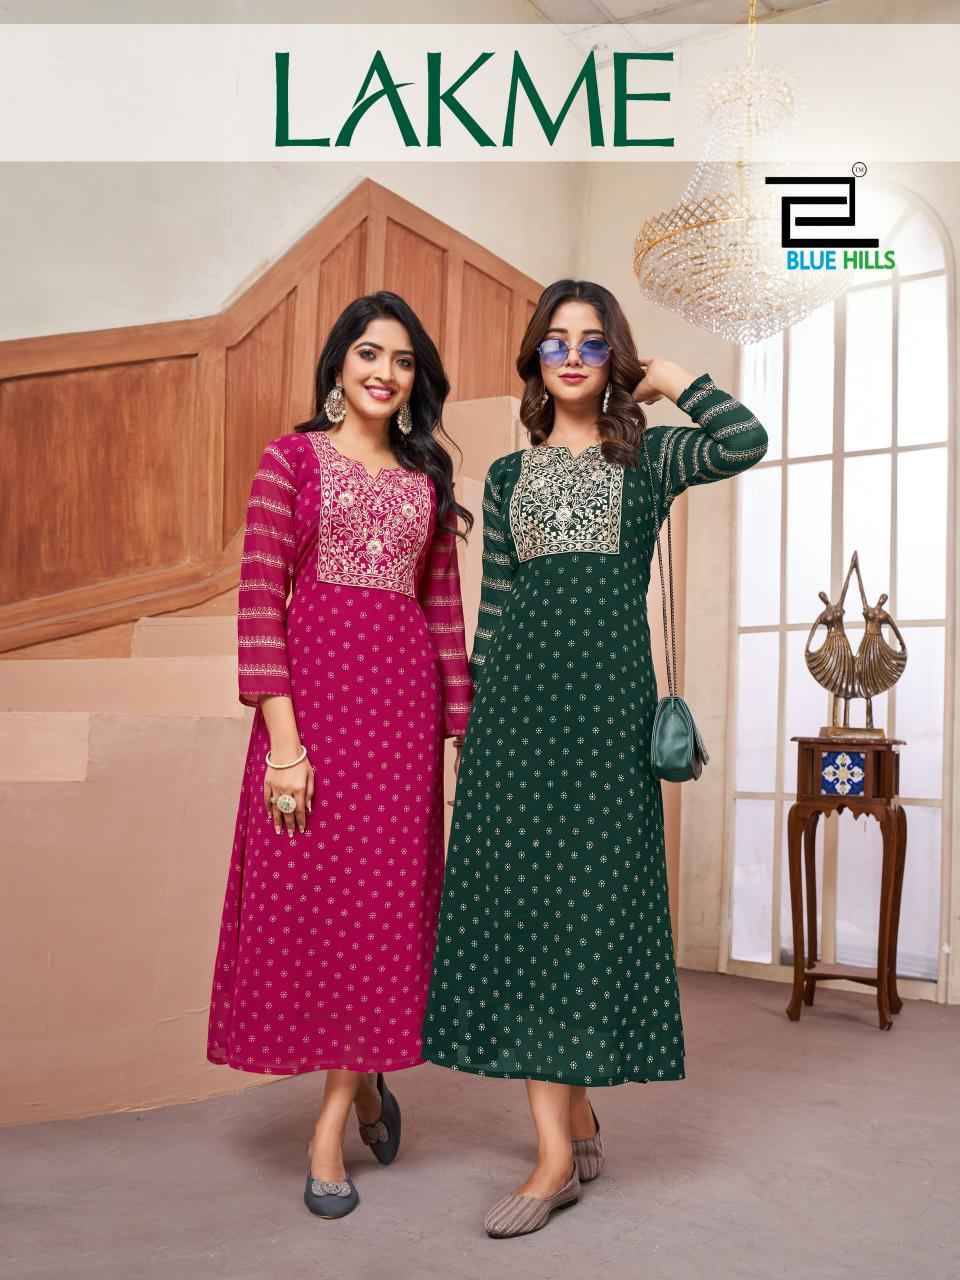 Lakme By Blue Hills 1001 To 1006 Series Designer Stylish Fancy Colorful Beautiful Party Wear & Ethnic Wear Collection Georgette With Work Kurtis At Wholesale Price